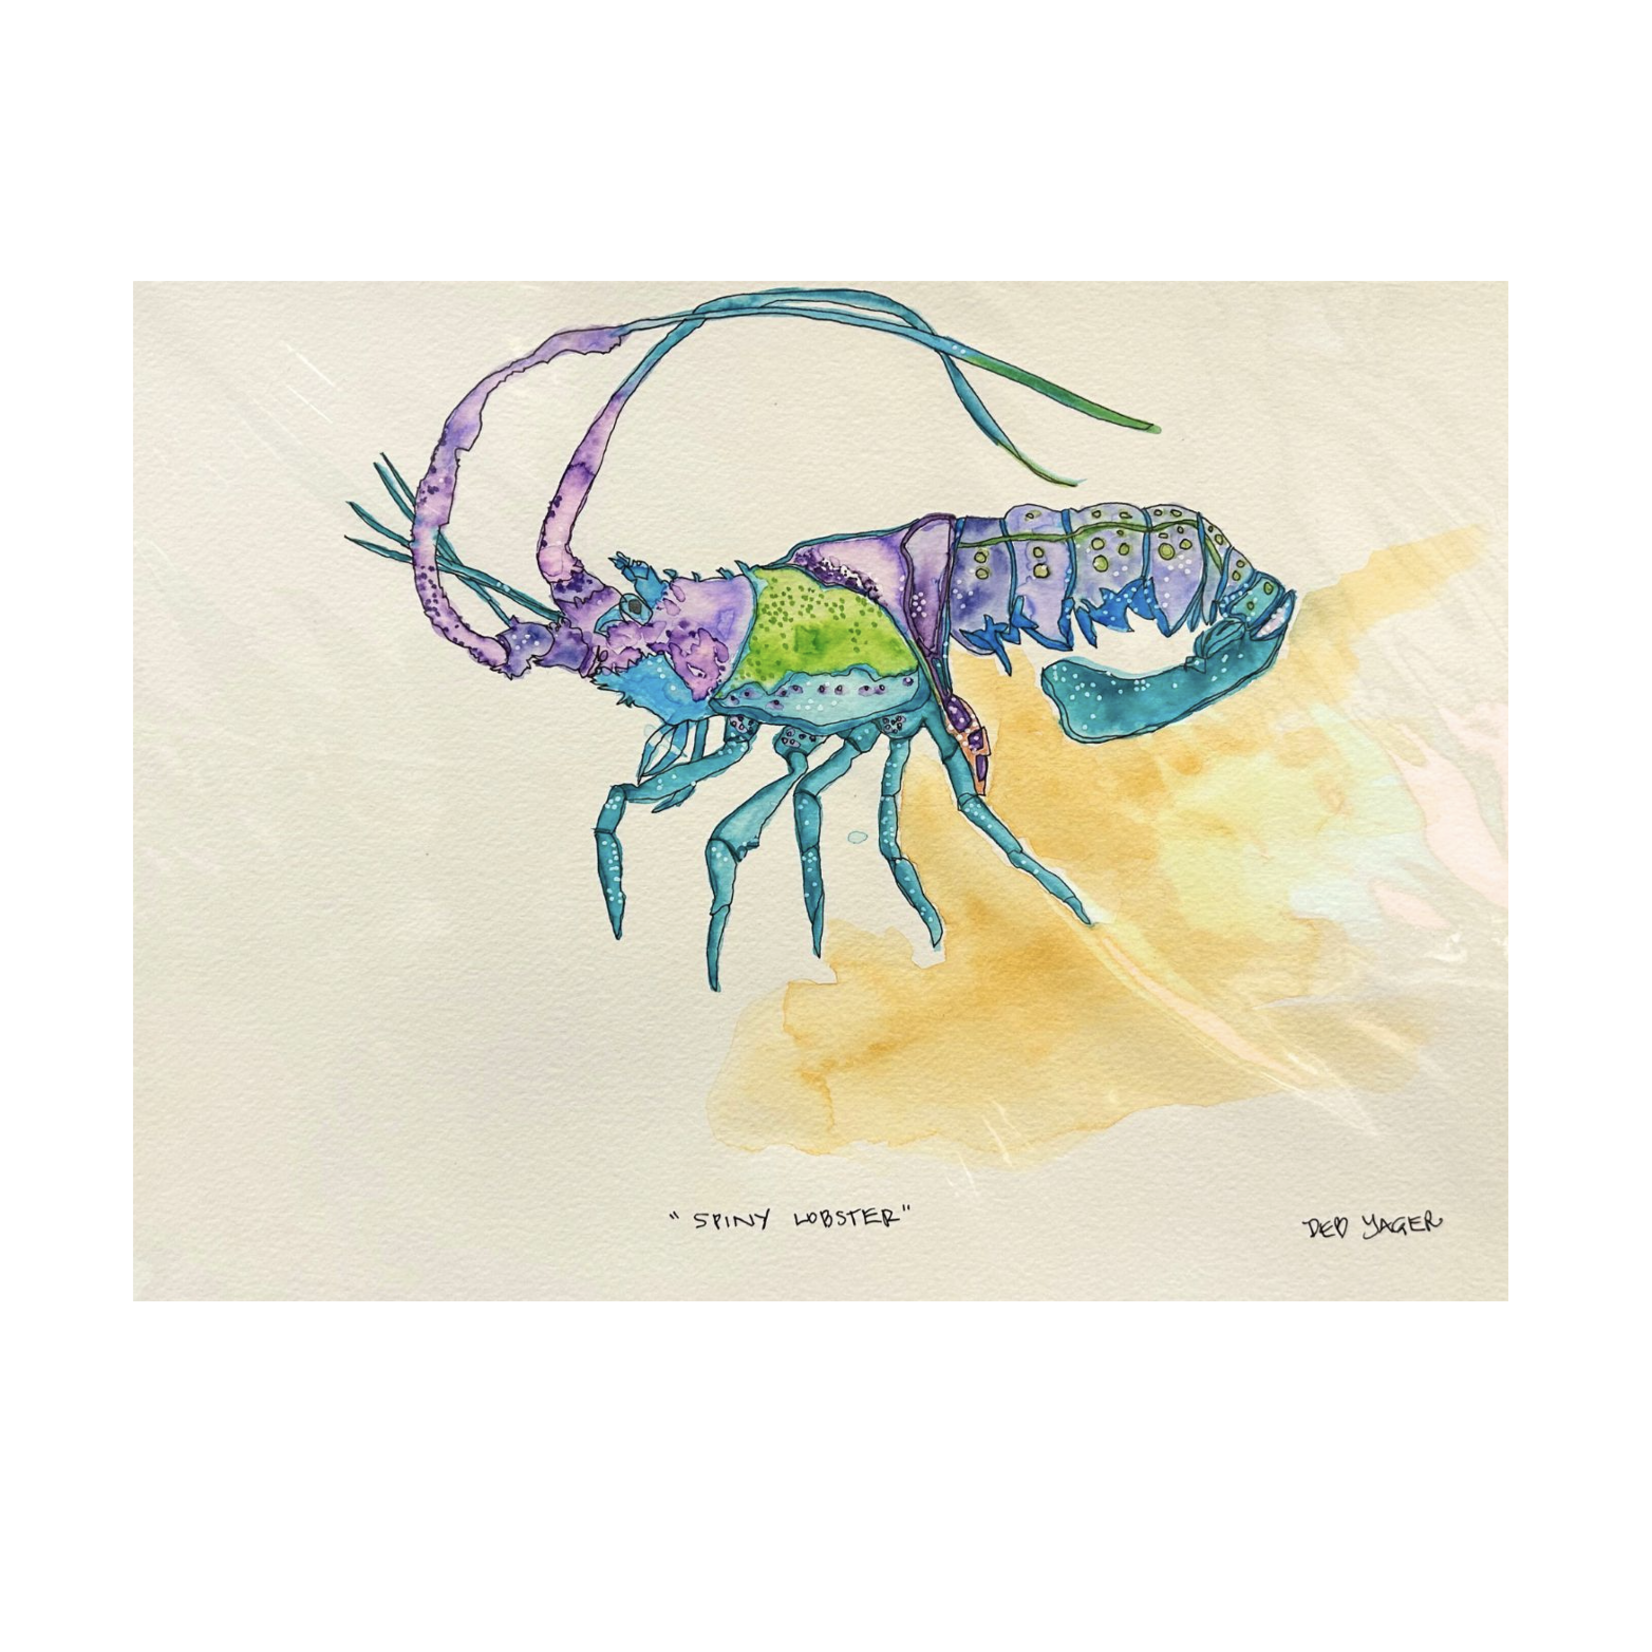 Outside The Box 14x11. "Spiny Lobster" Original Watercolor Artwork